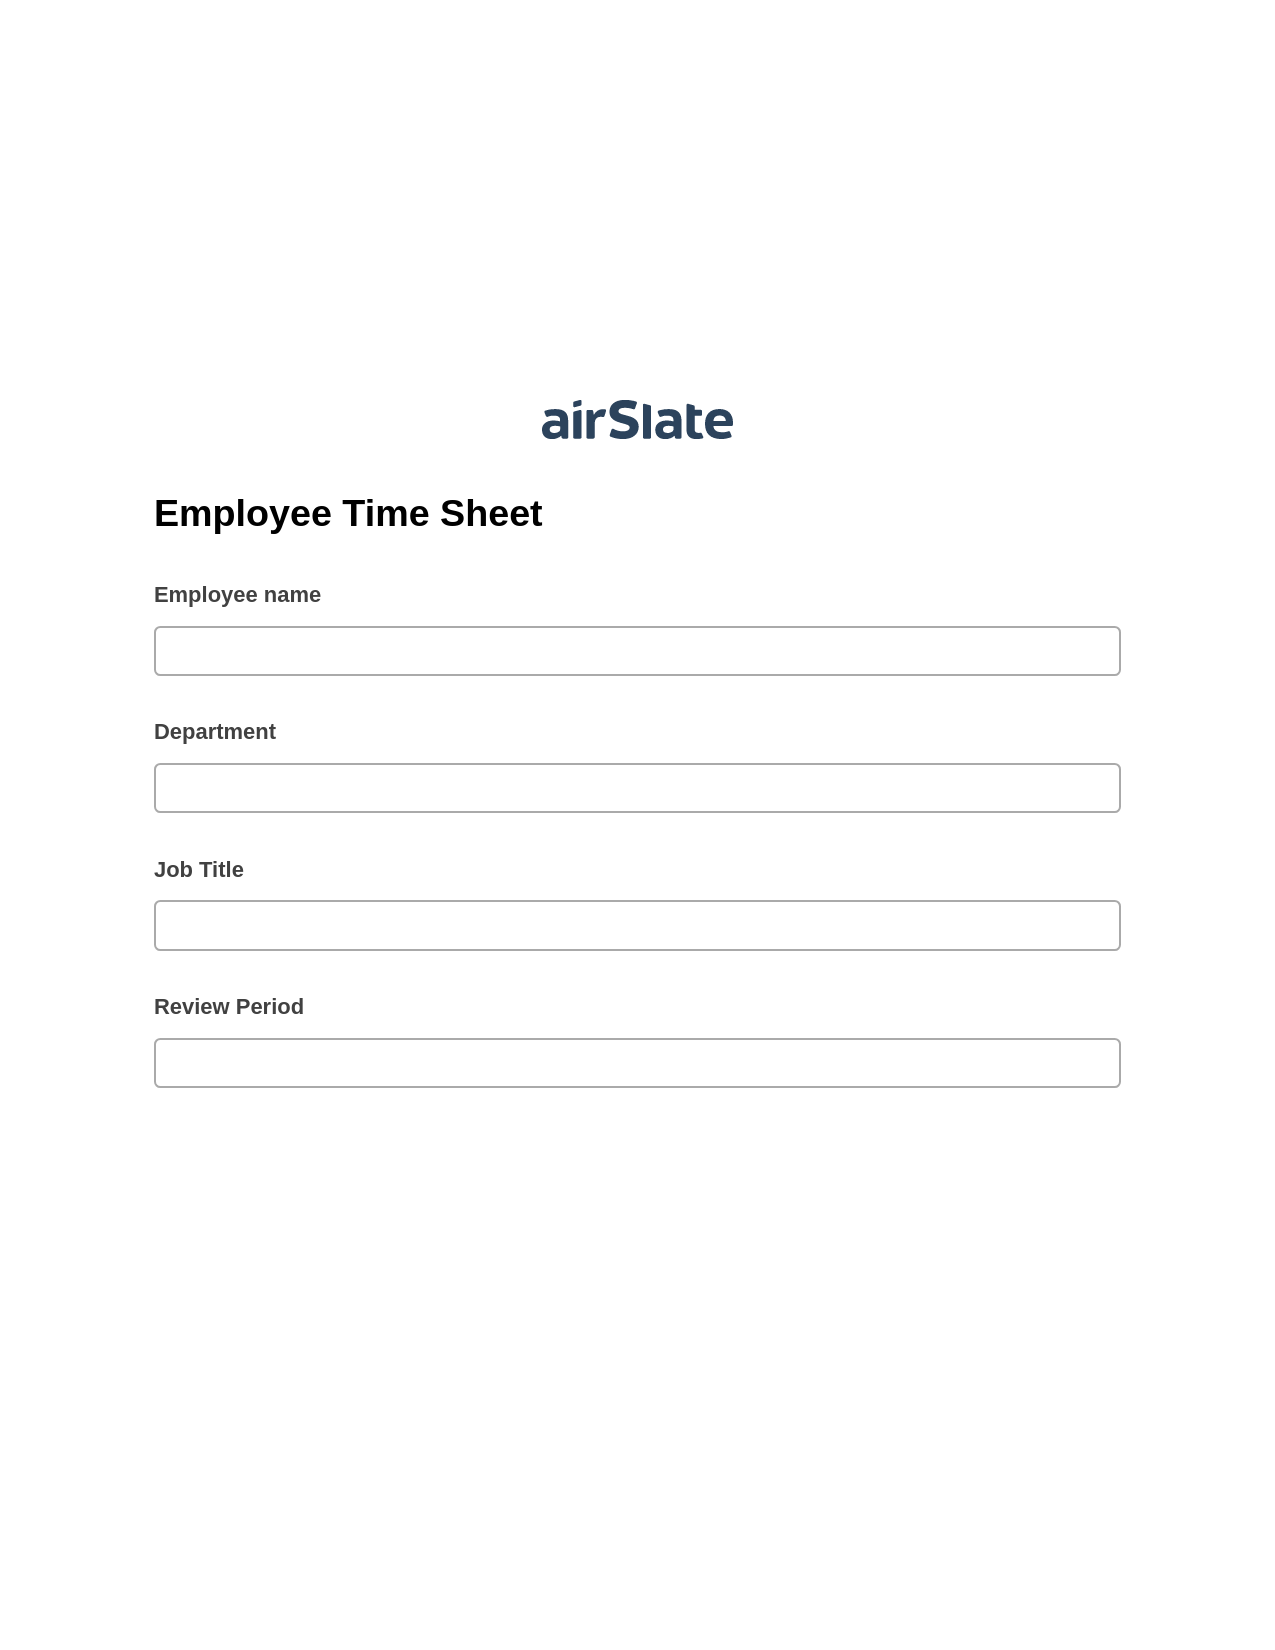 Employee Time Sheet Pre-fill from MS Dynamics 365 Records, Add Tags to Slate Bot, Archive to Box Bot